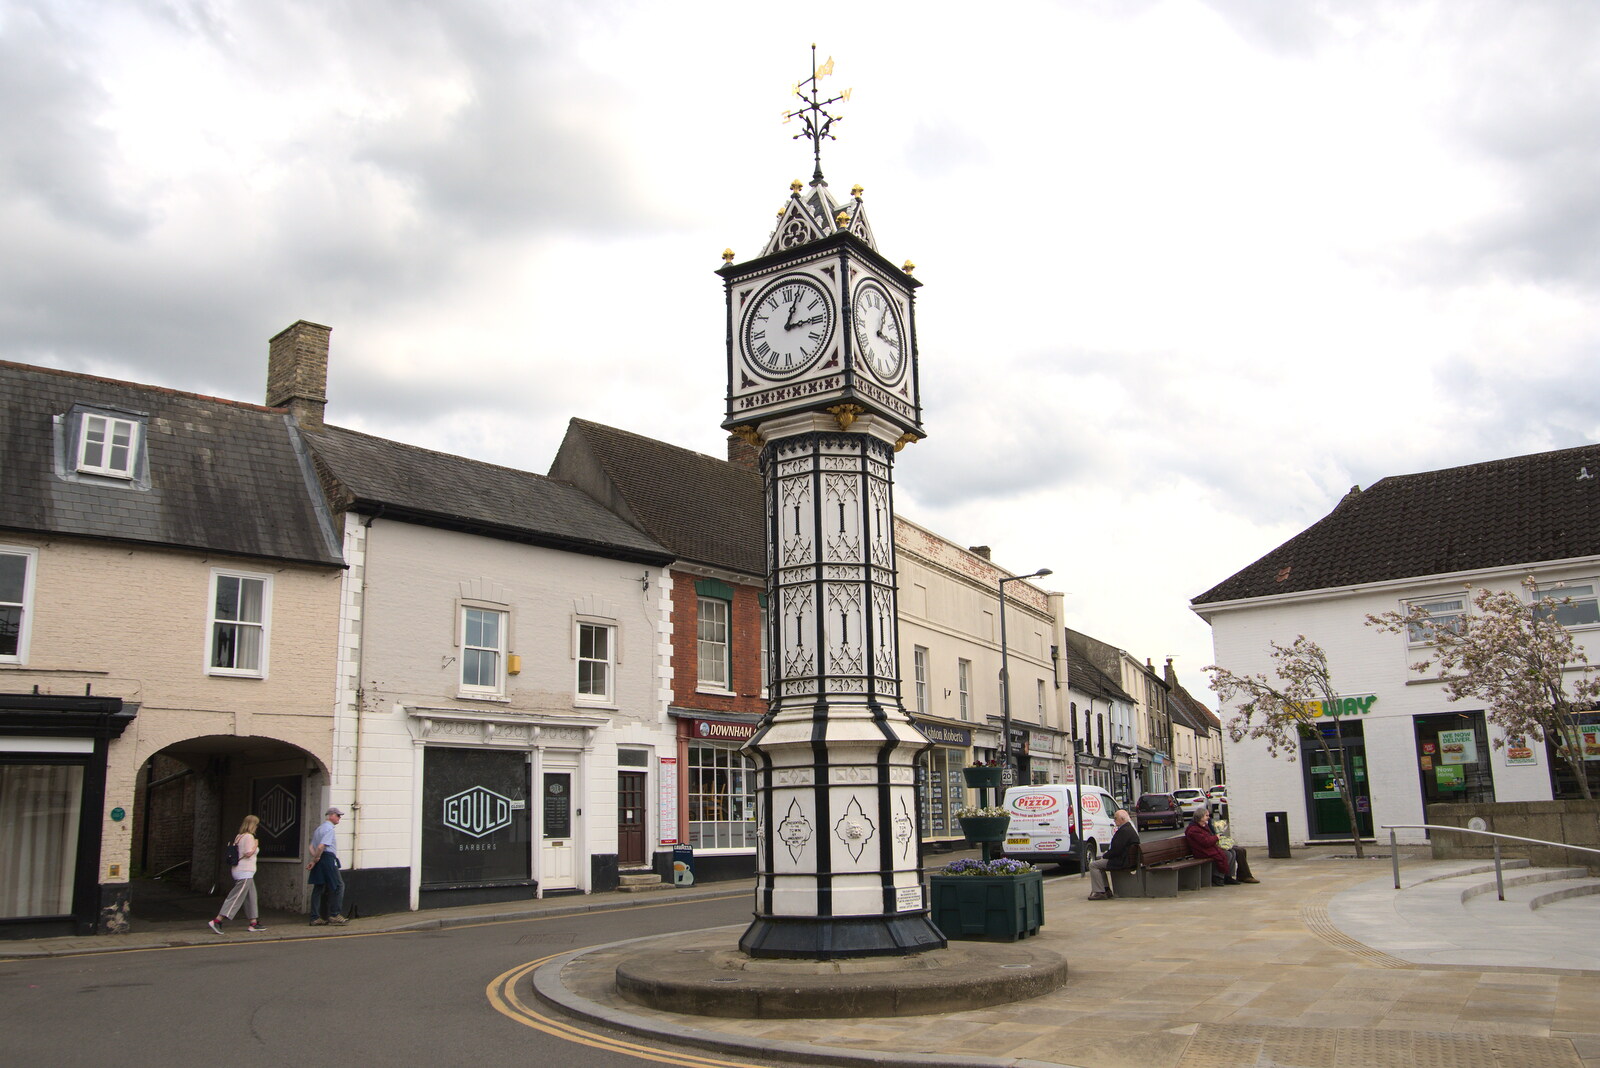 The James Scott clock in Downham Market from A Vaccination Afternoon, Swaffham, Norfolk - 9th May 2021